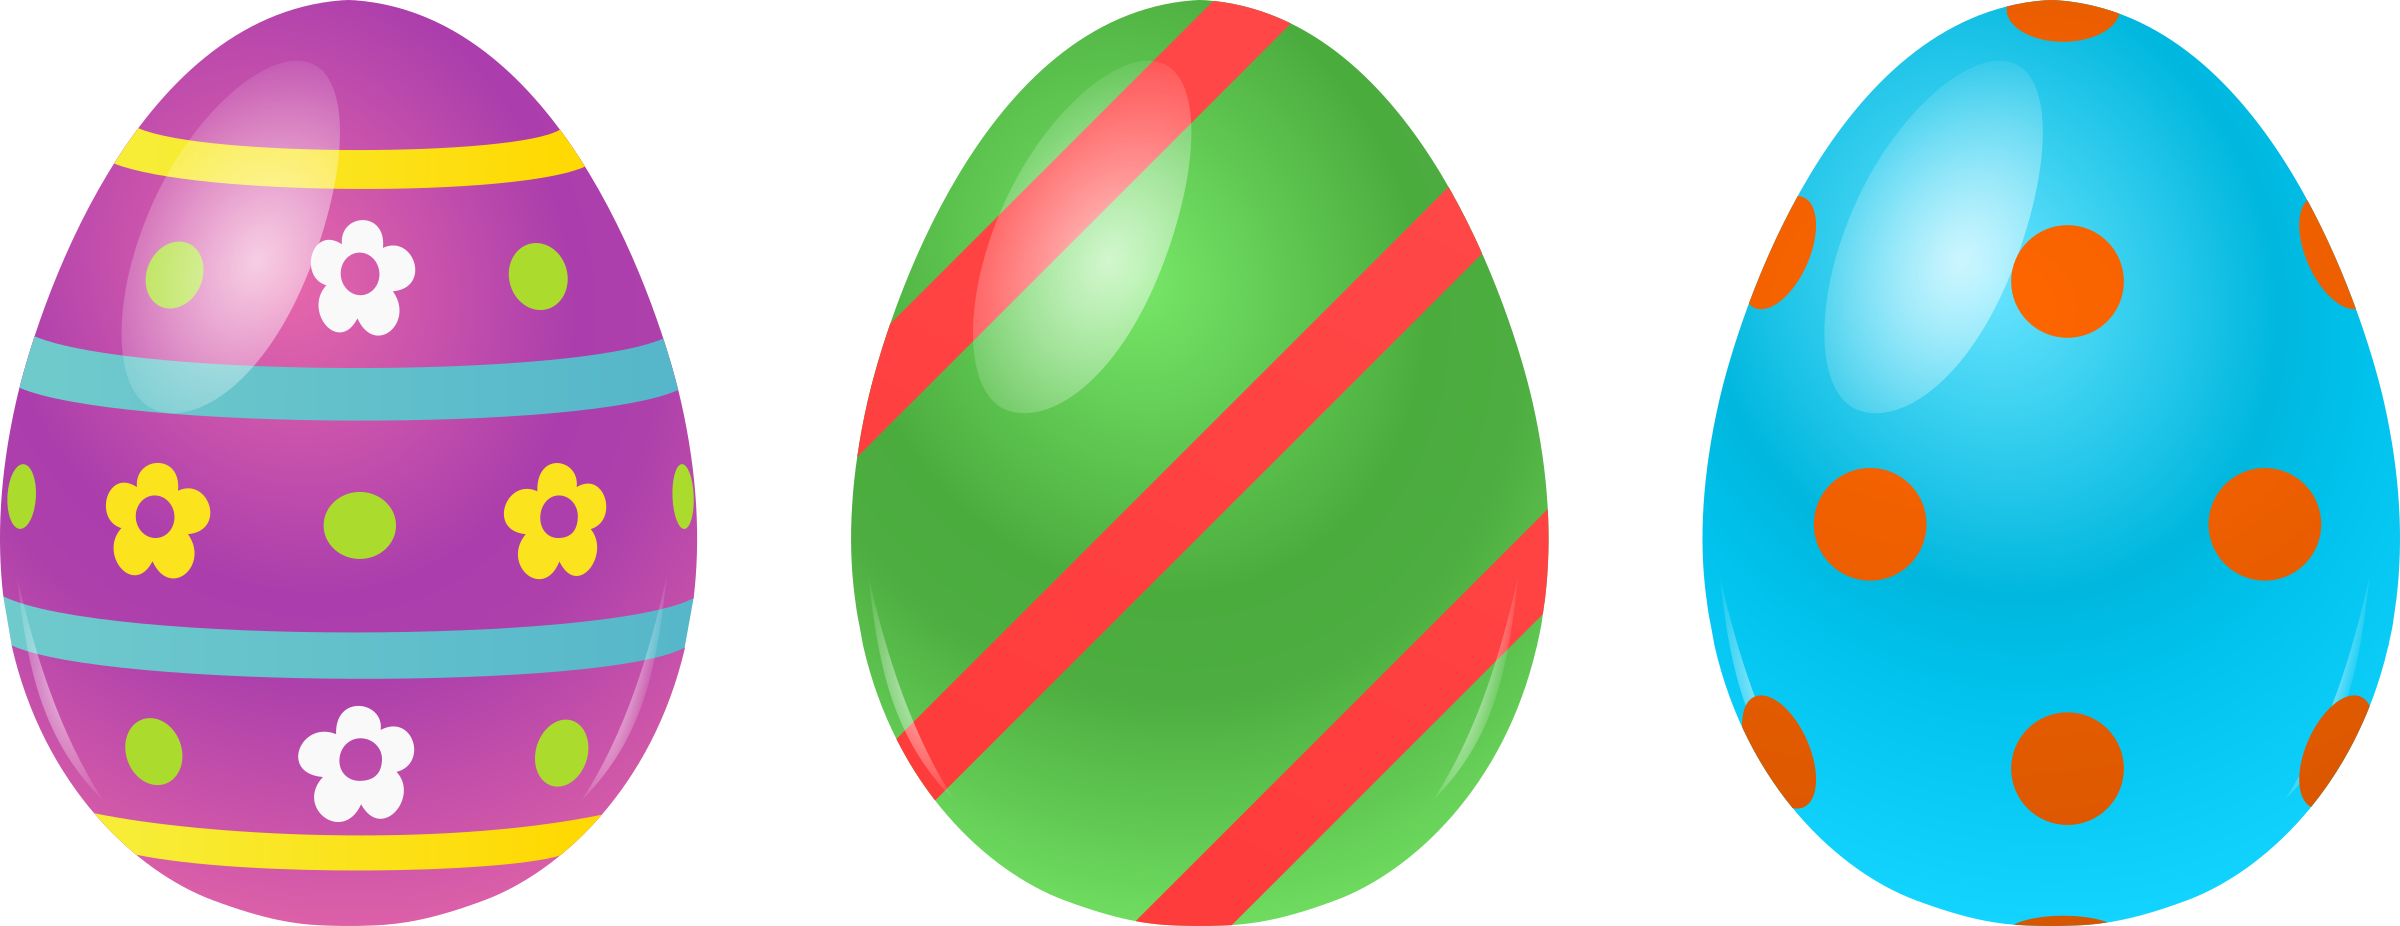 Download PNG image - Colorful Easter Eggs PNG HD 